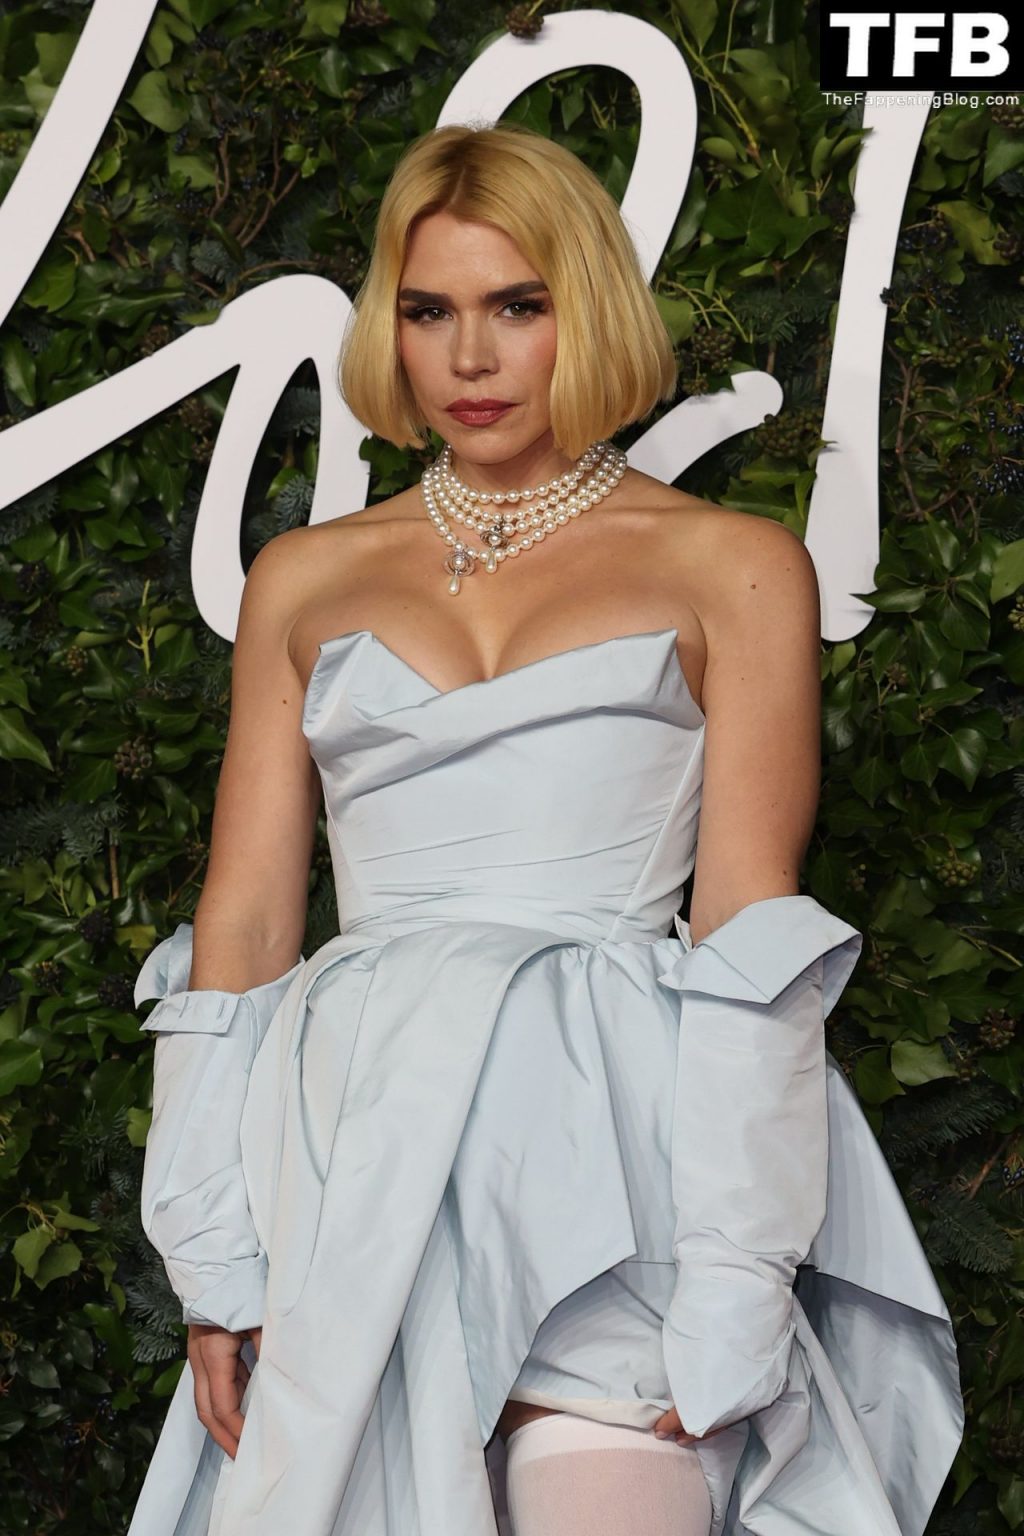 Billie Piper Puts On Busty Display at The Fashion Awards 2021 (33 Photos)